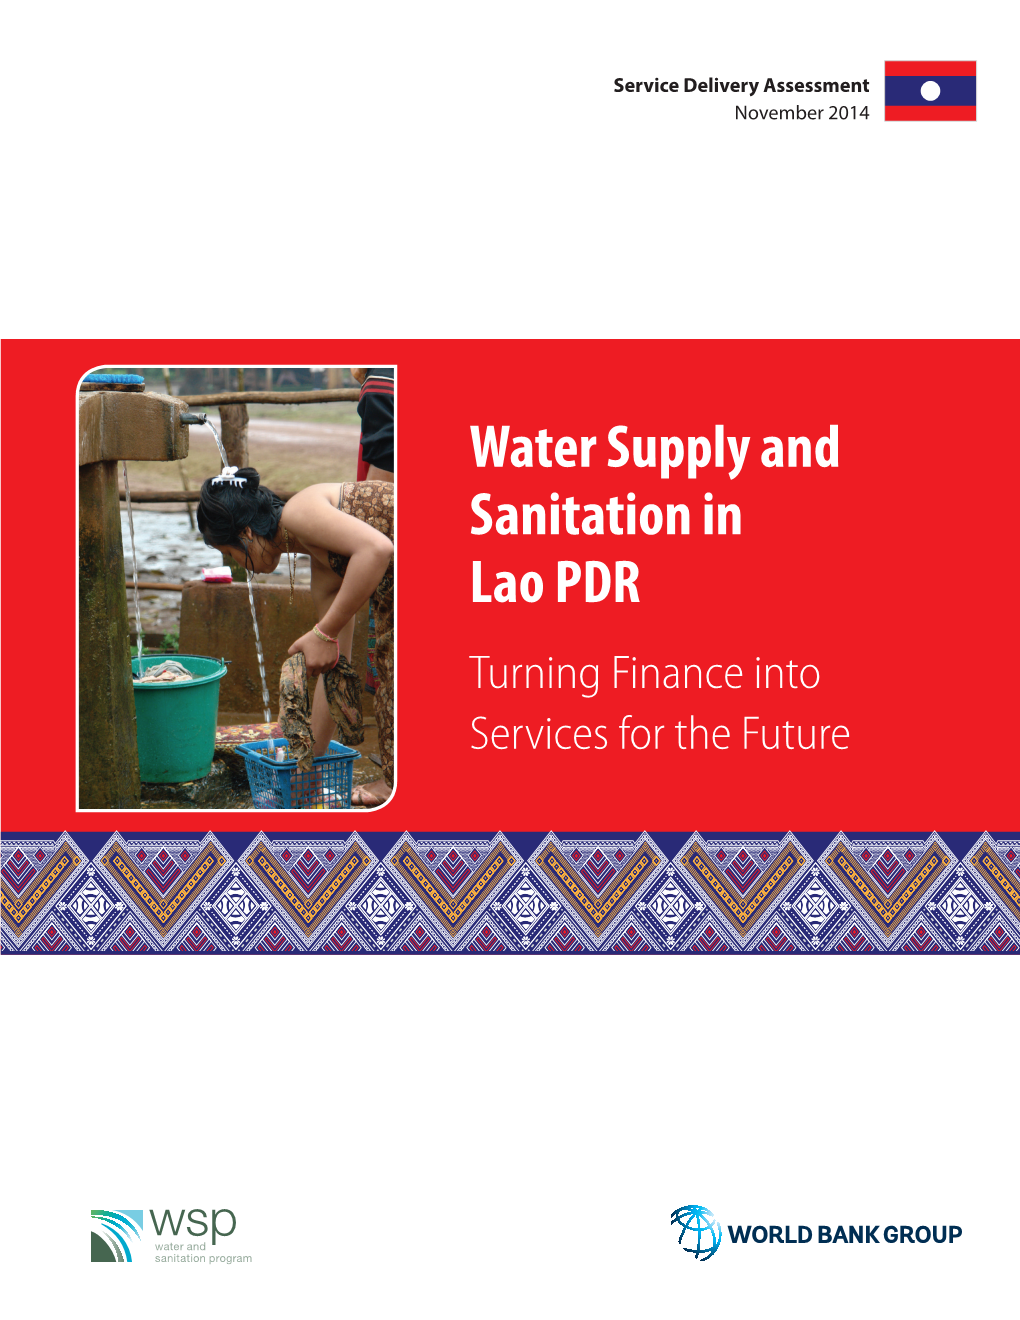 Water Supply and Sanitation in Lao